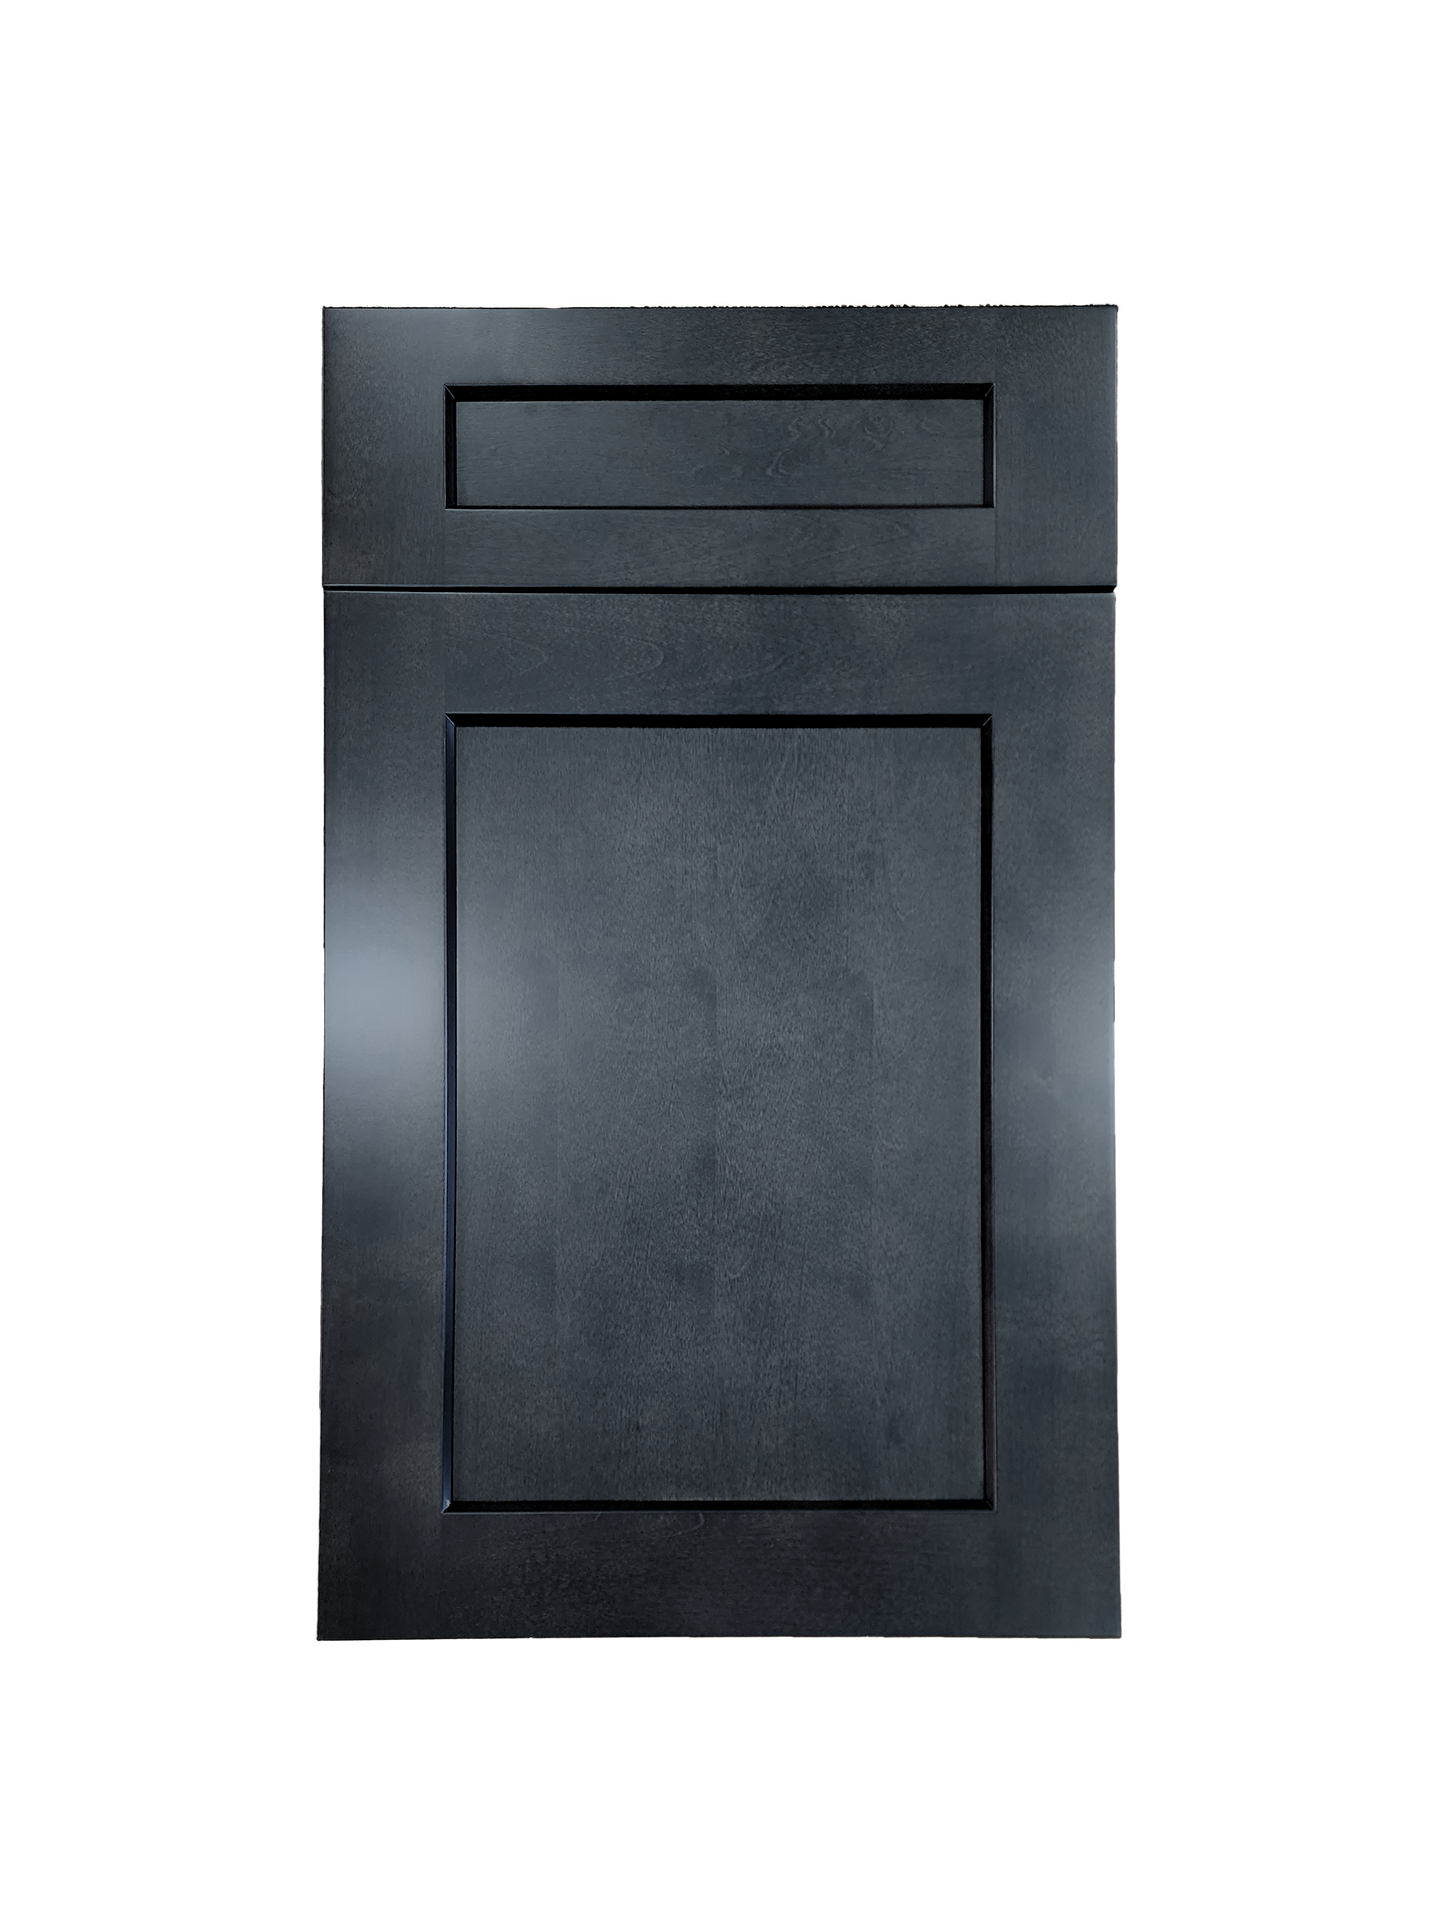 Stormy Grey Wall Cabinet 36 inches wide 12 inches deep 30 inches tall with Stormy Grey box and Stormy Grey doors